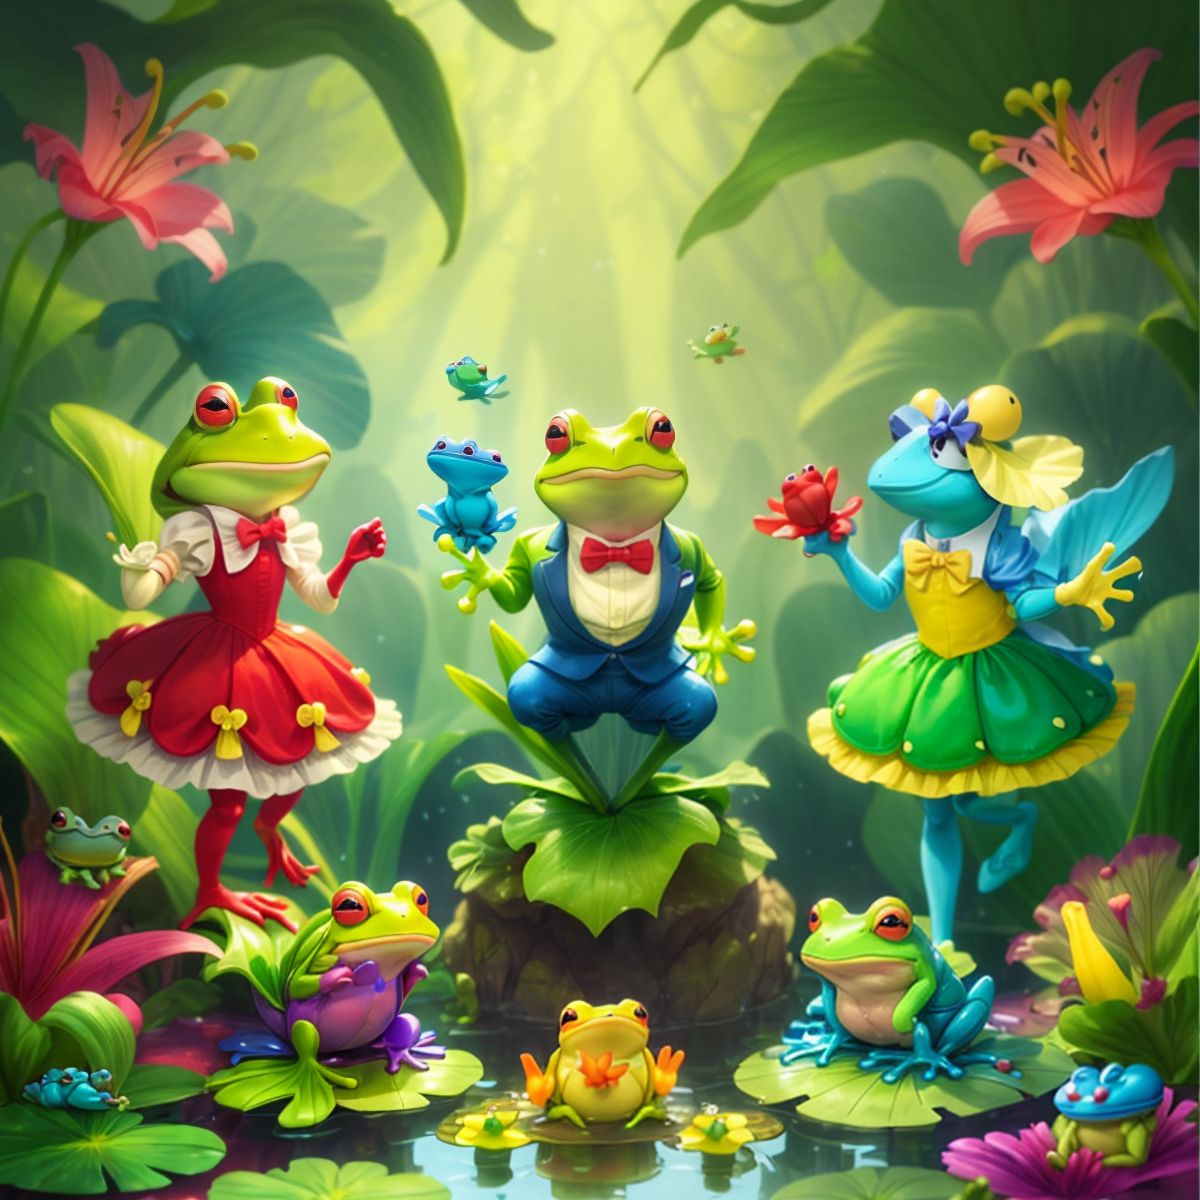 Frogs and toads hopping off the Lily Pads after the celebration